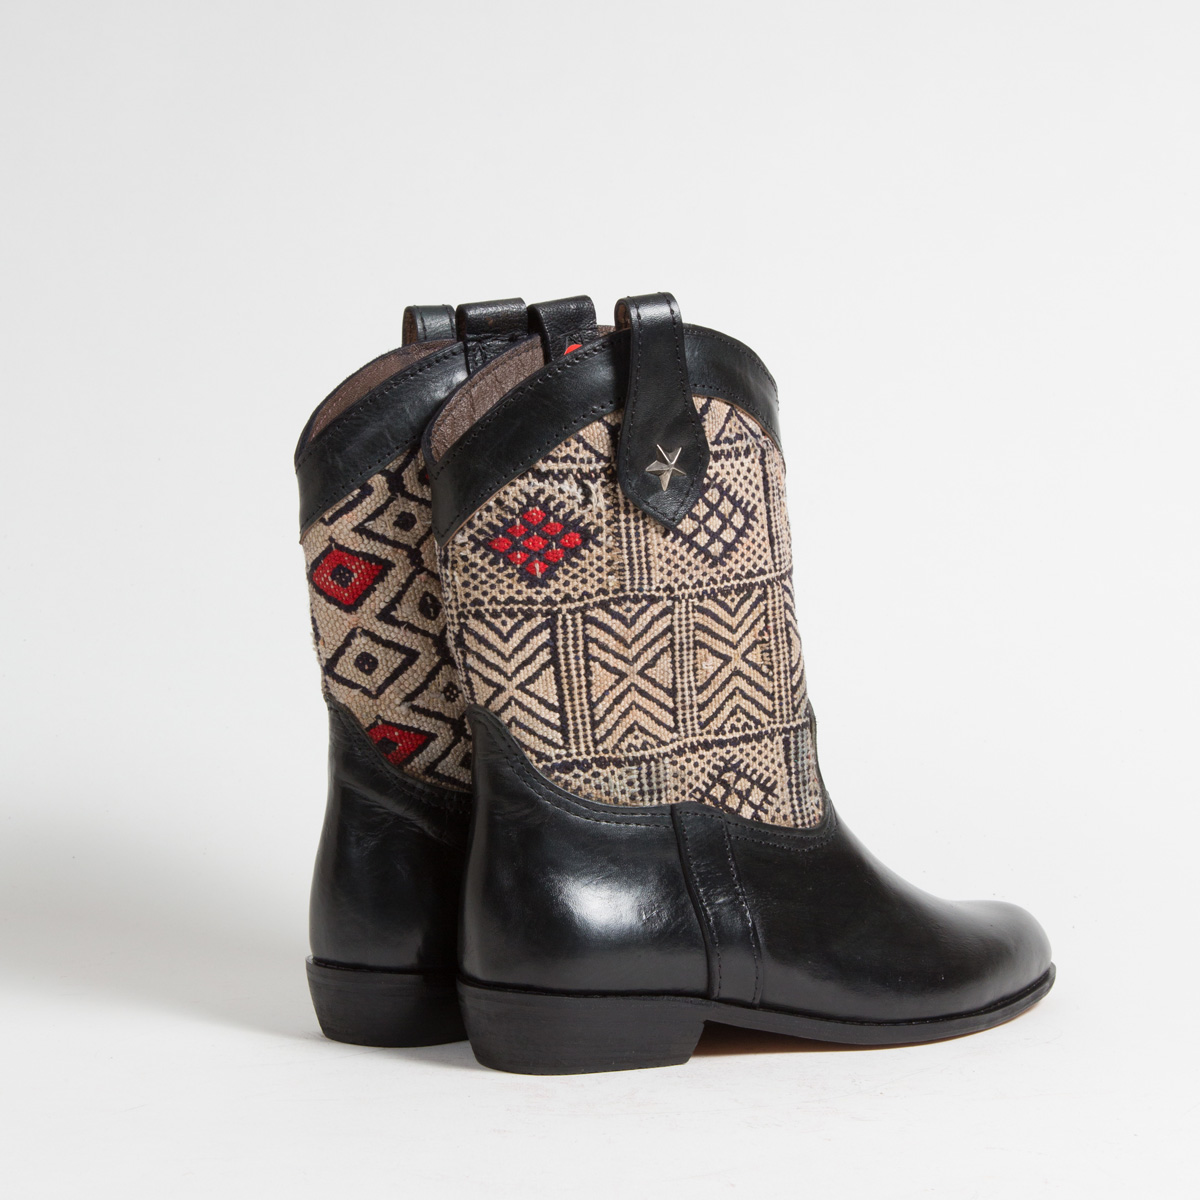 Bottines Kilim cuir mababouche artisanales (Réf. MN14-41)